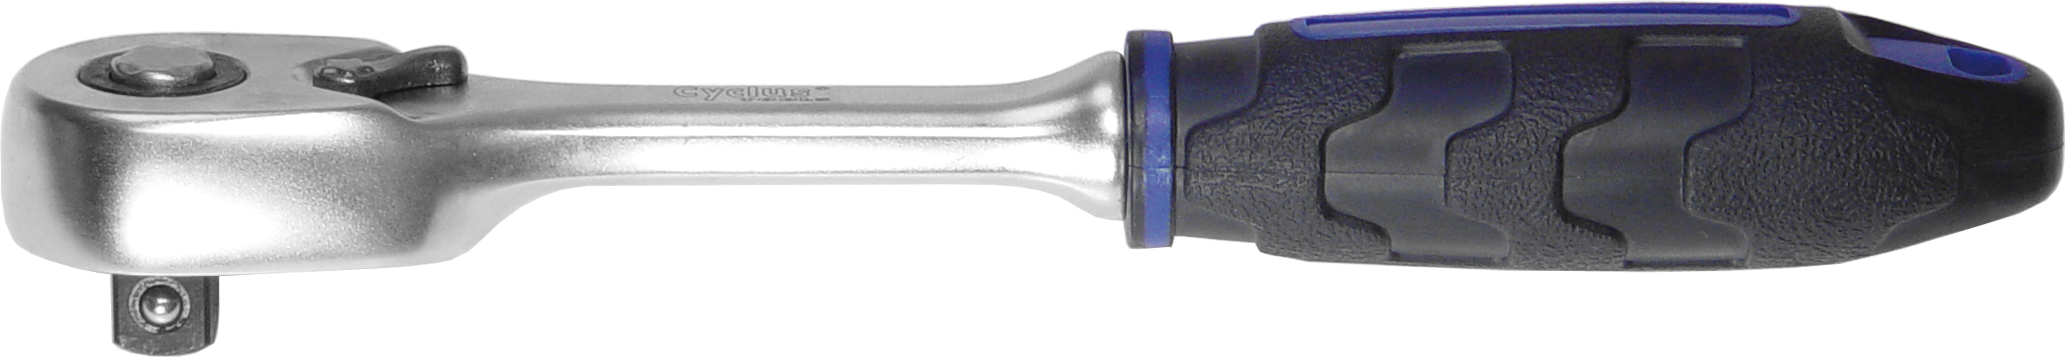 CYCLUS TOOLS 3/8 reversible ratchet with switcher, rubber grip